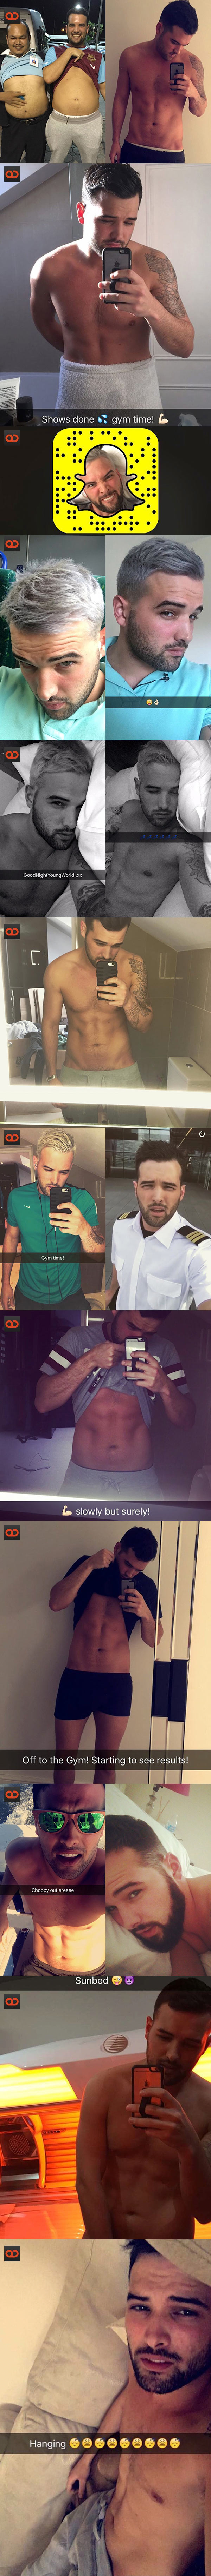 qc-ricky_rayment_towie_star_caught_naked_on_snapchat-collage02